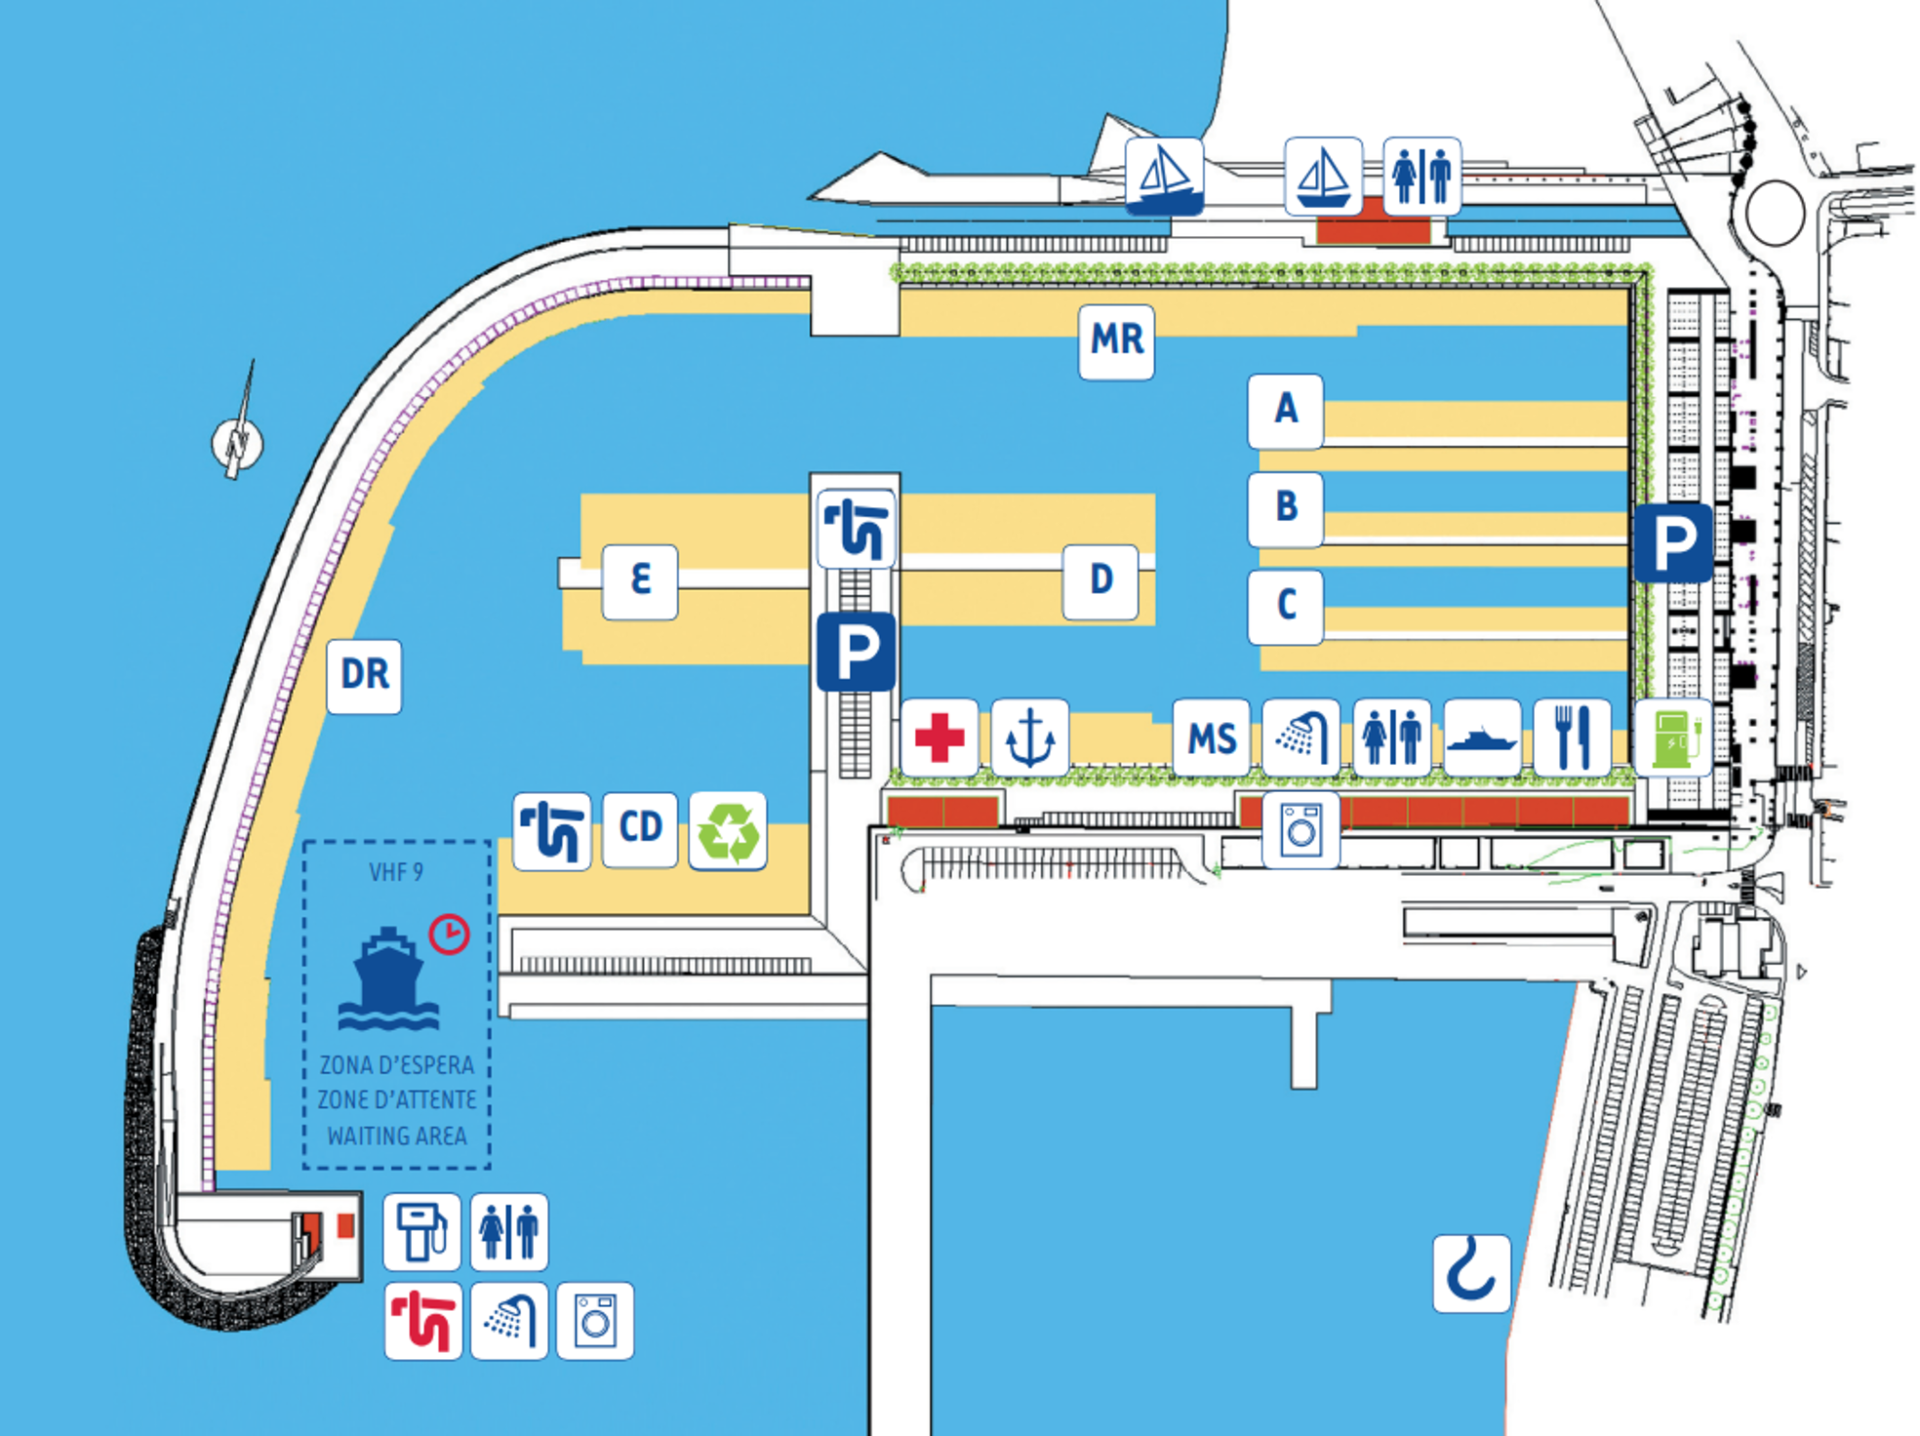 Map of the port